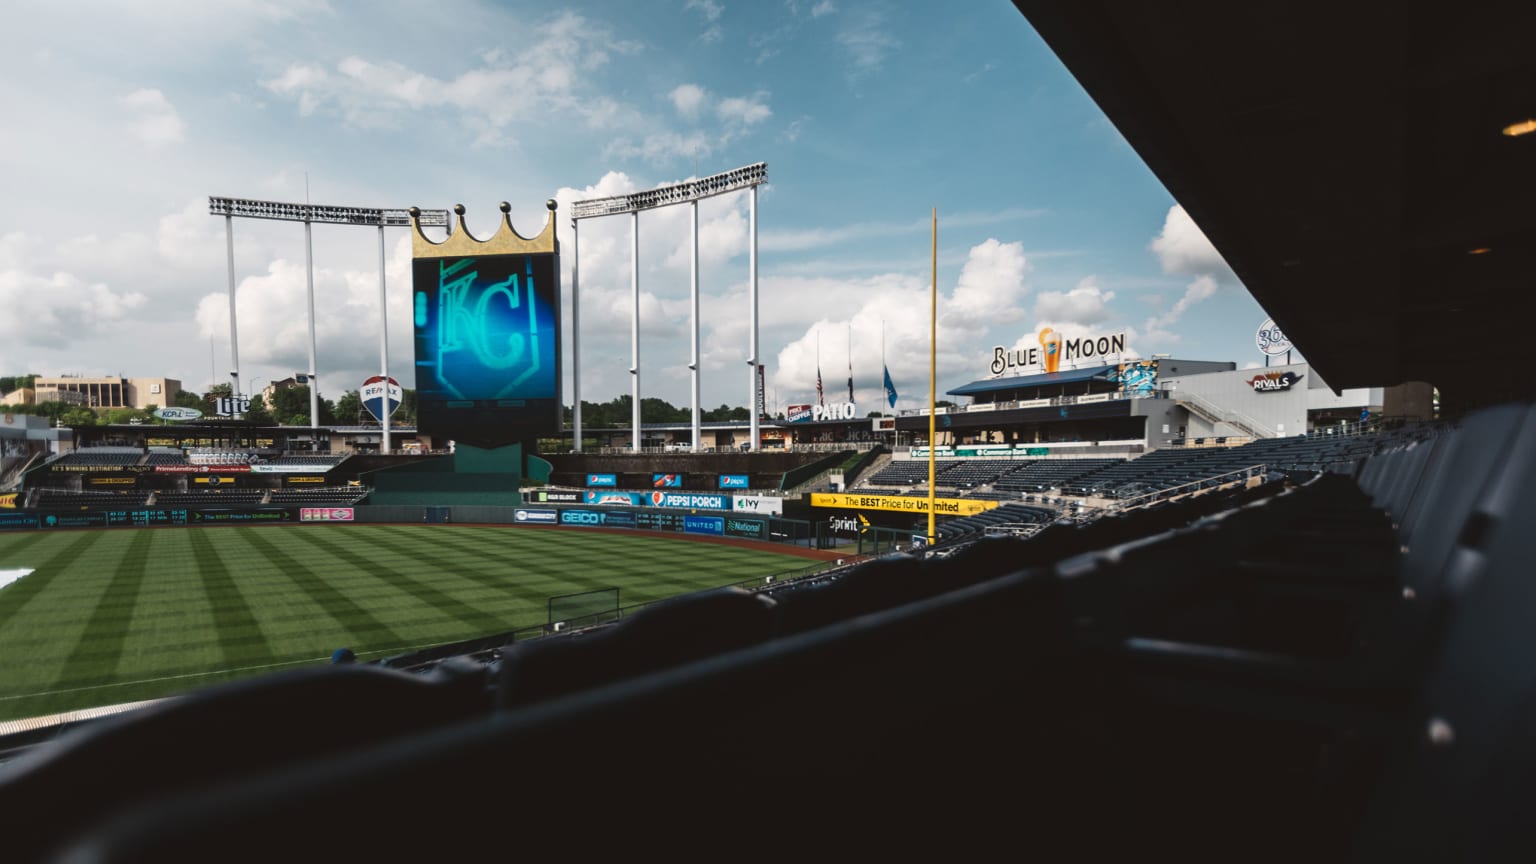 How to watch the Kansas City Royals online